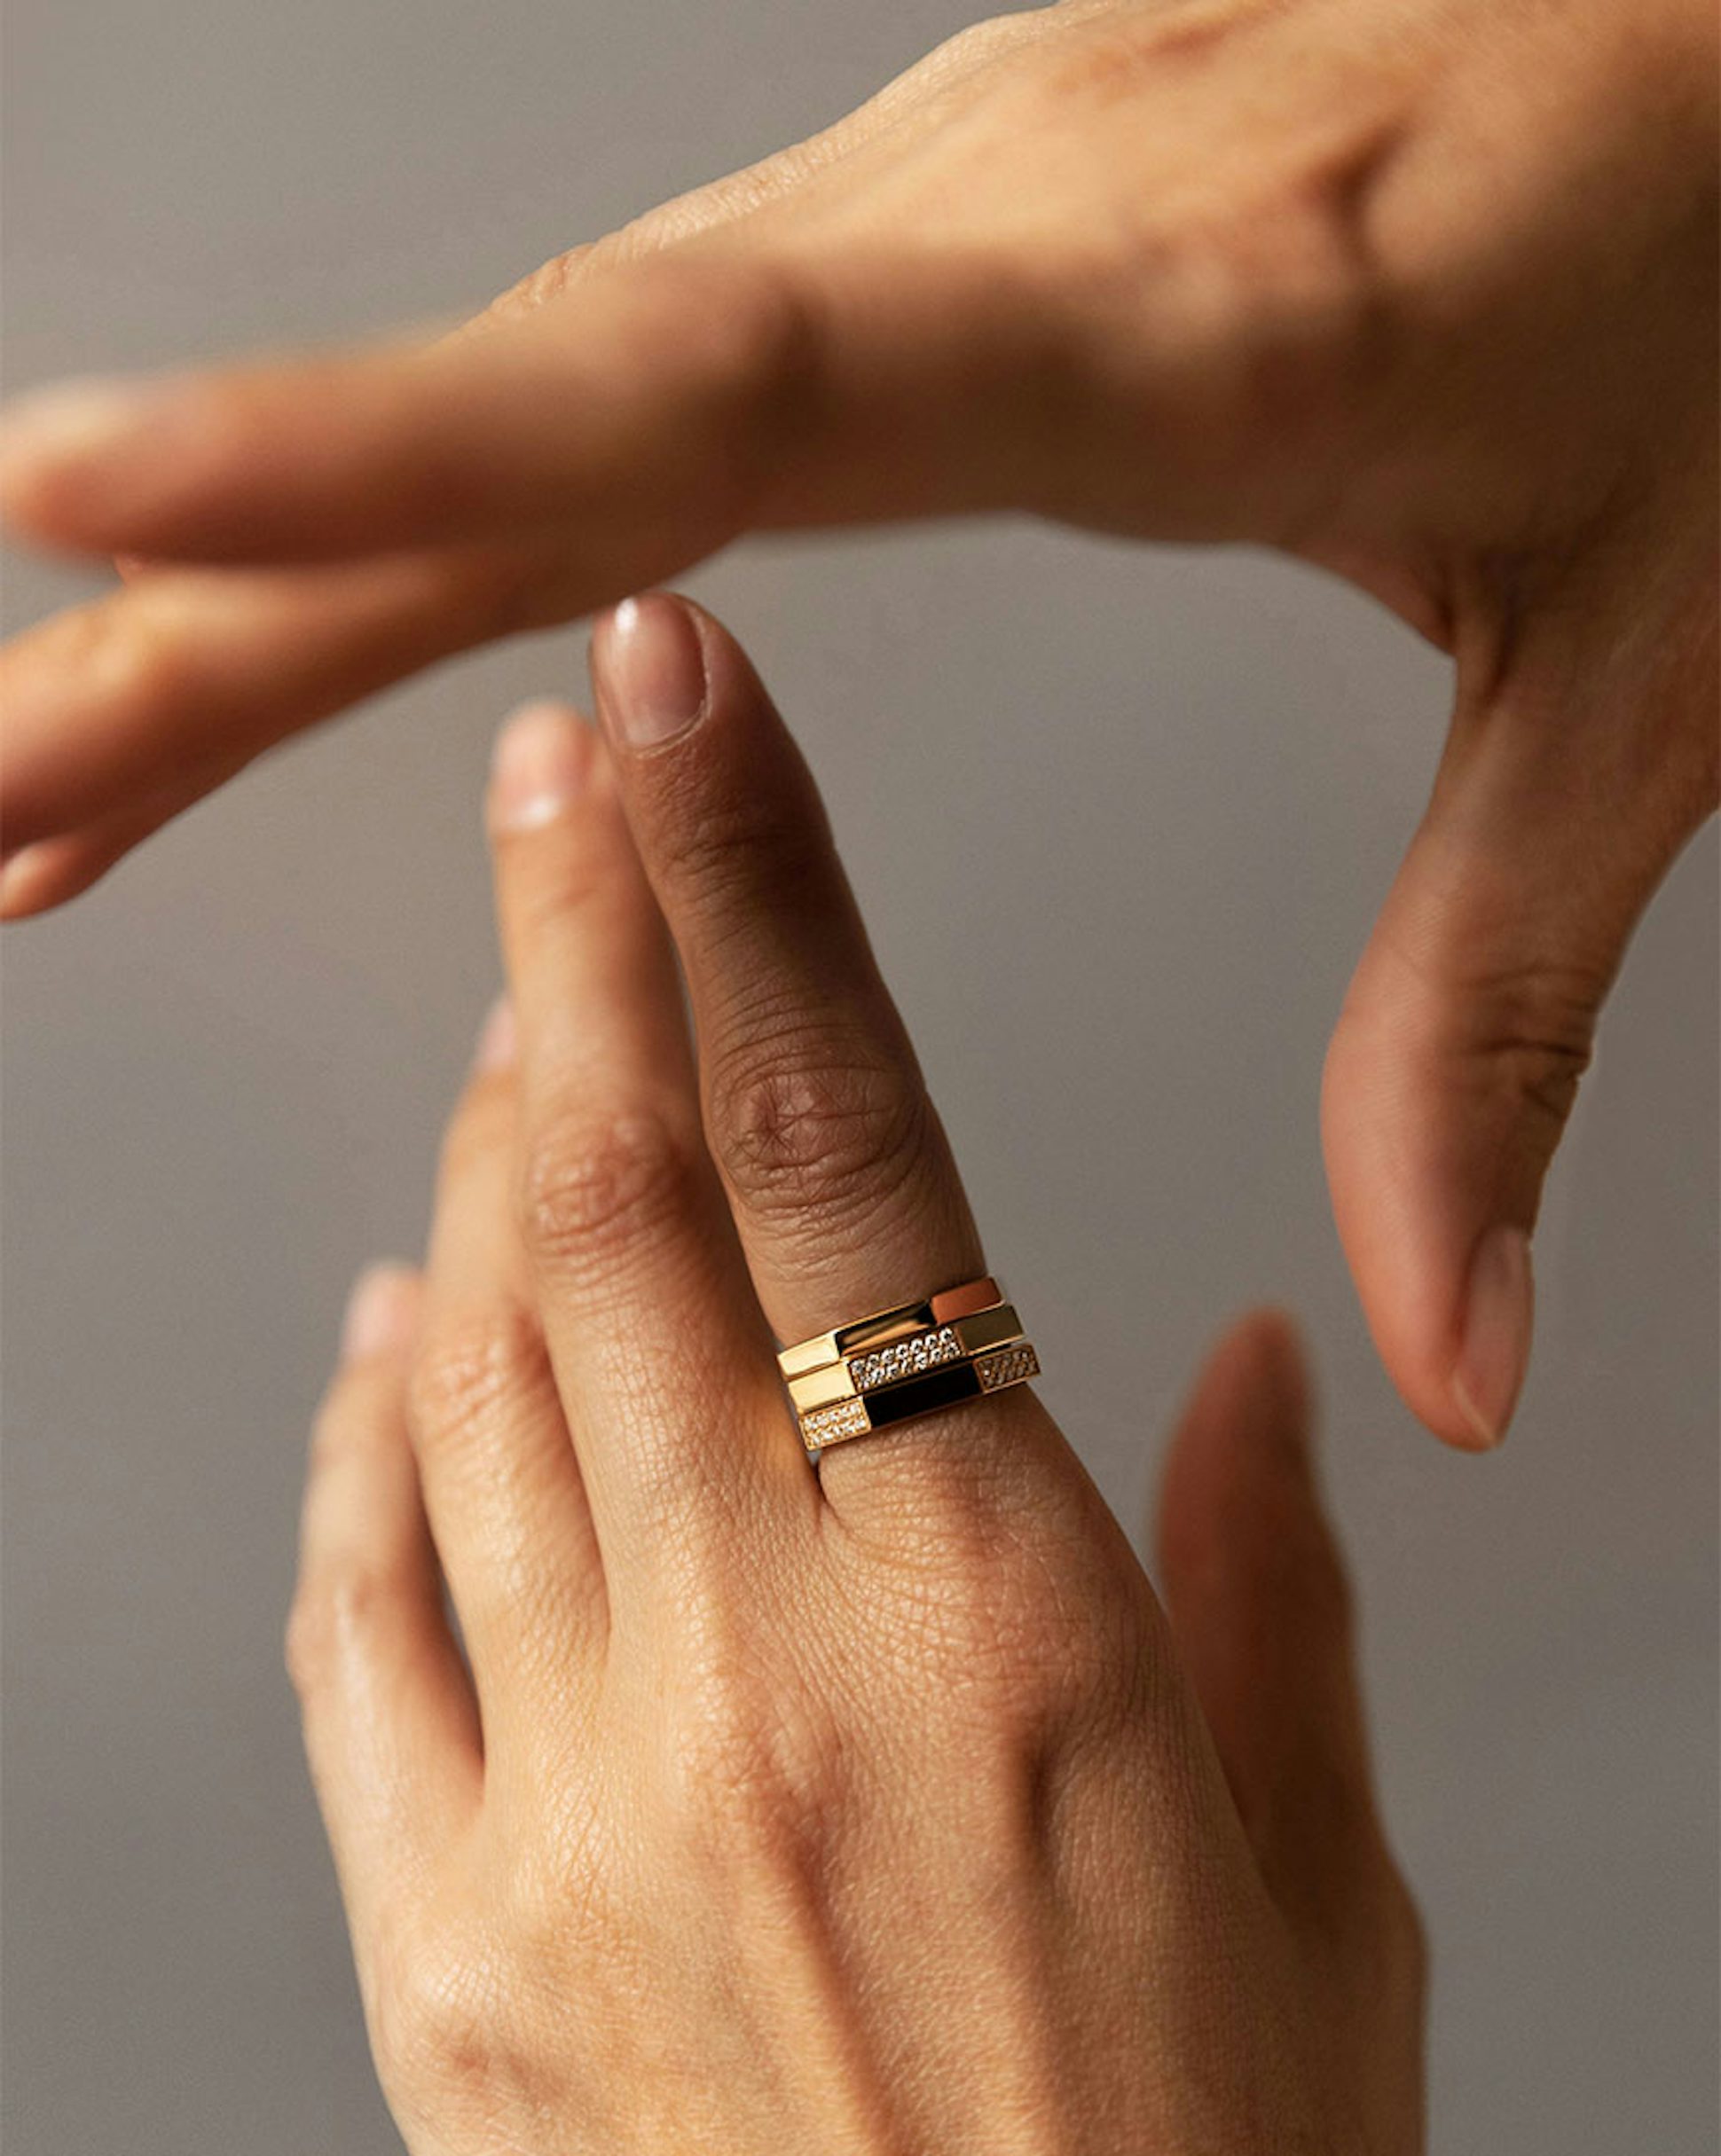 Octogone rings in Fairmined-certified ethical yellow gold paved with labgrown diamonds | JEM Jewellery Ethically Minded 